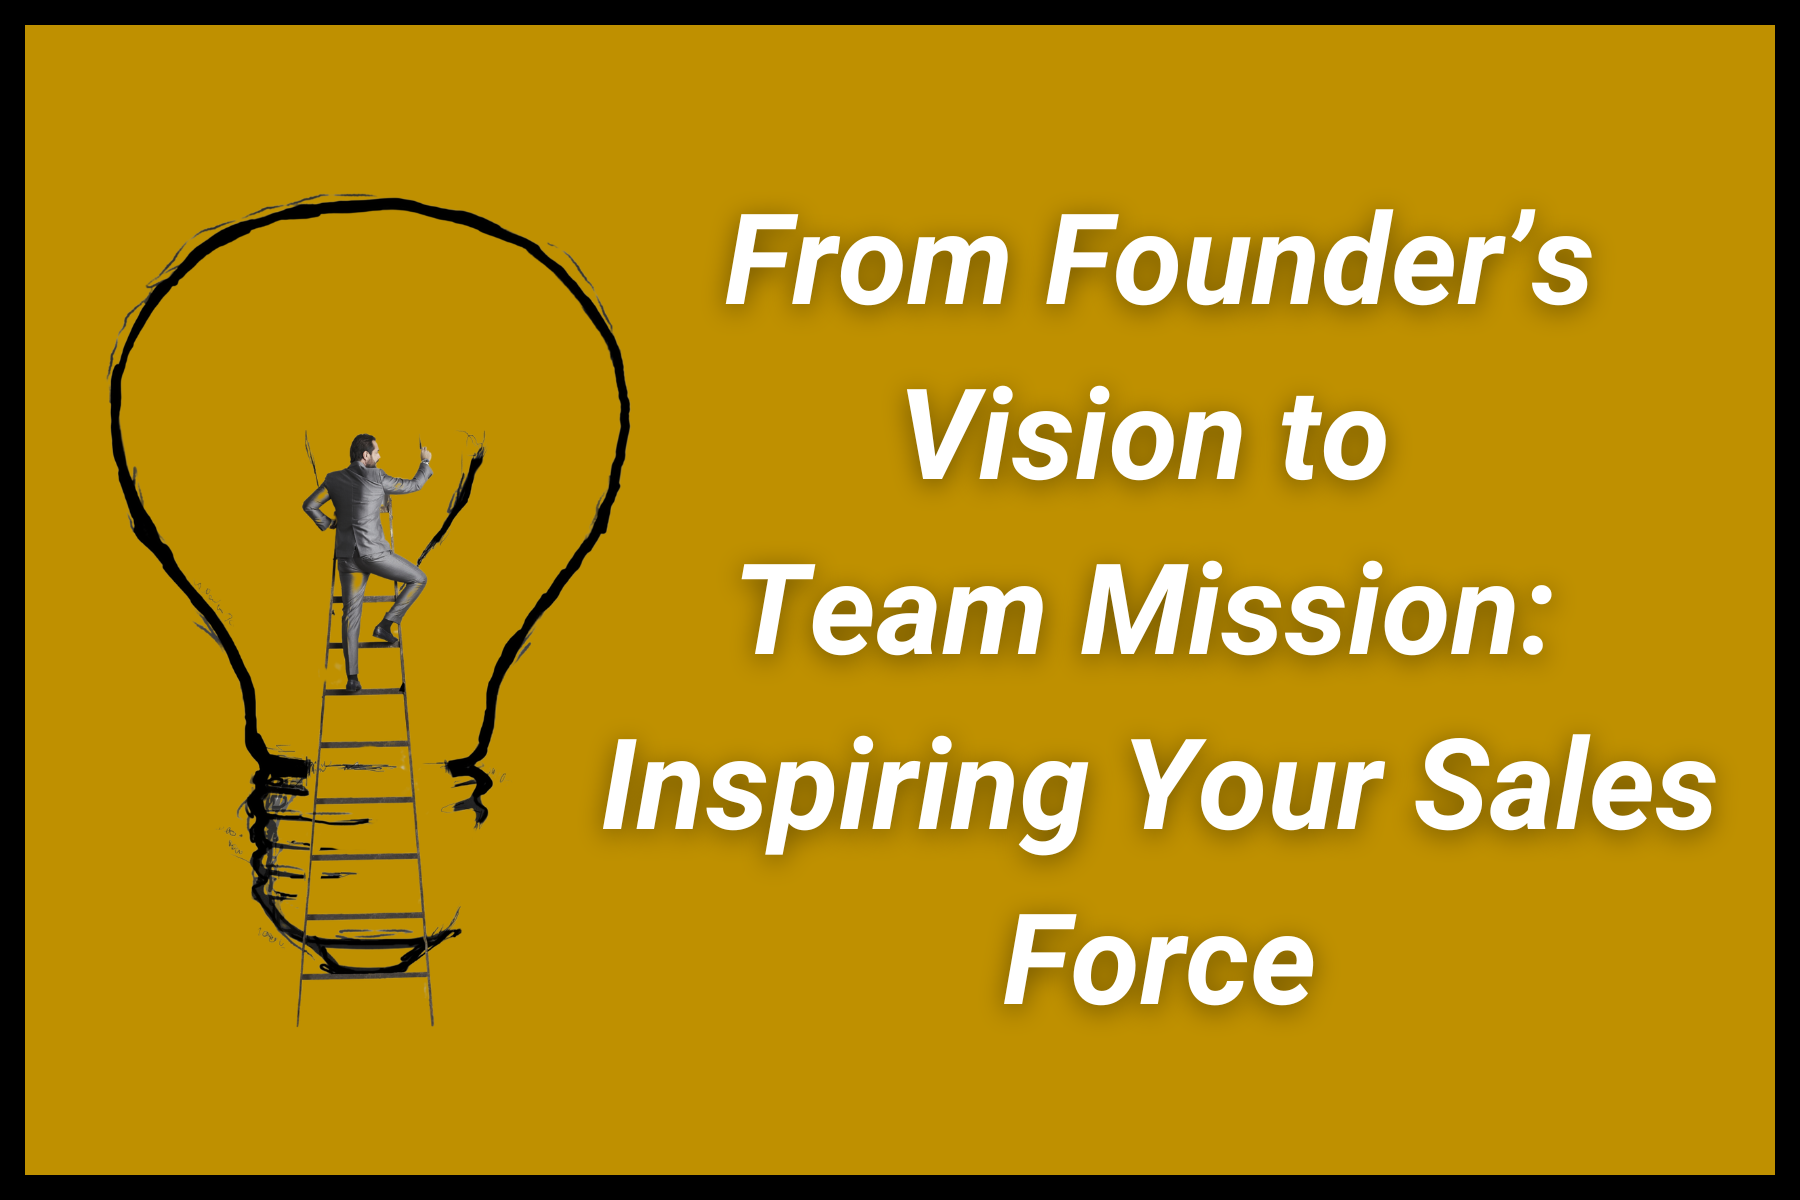 From Founder’s Vision to Team Mission: Inspiring Your Sales Force